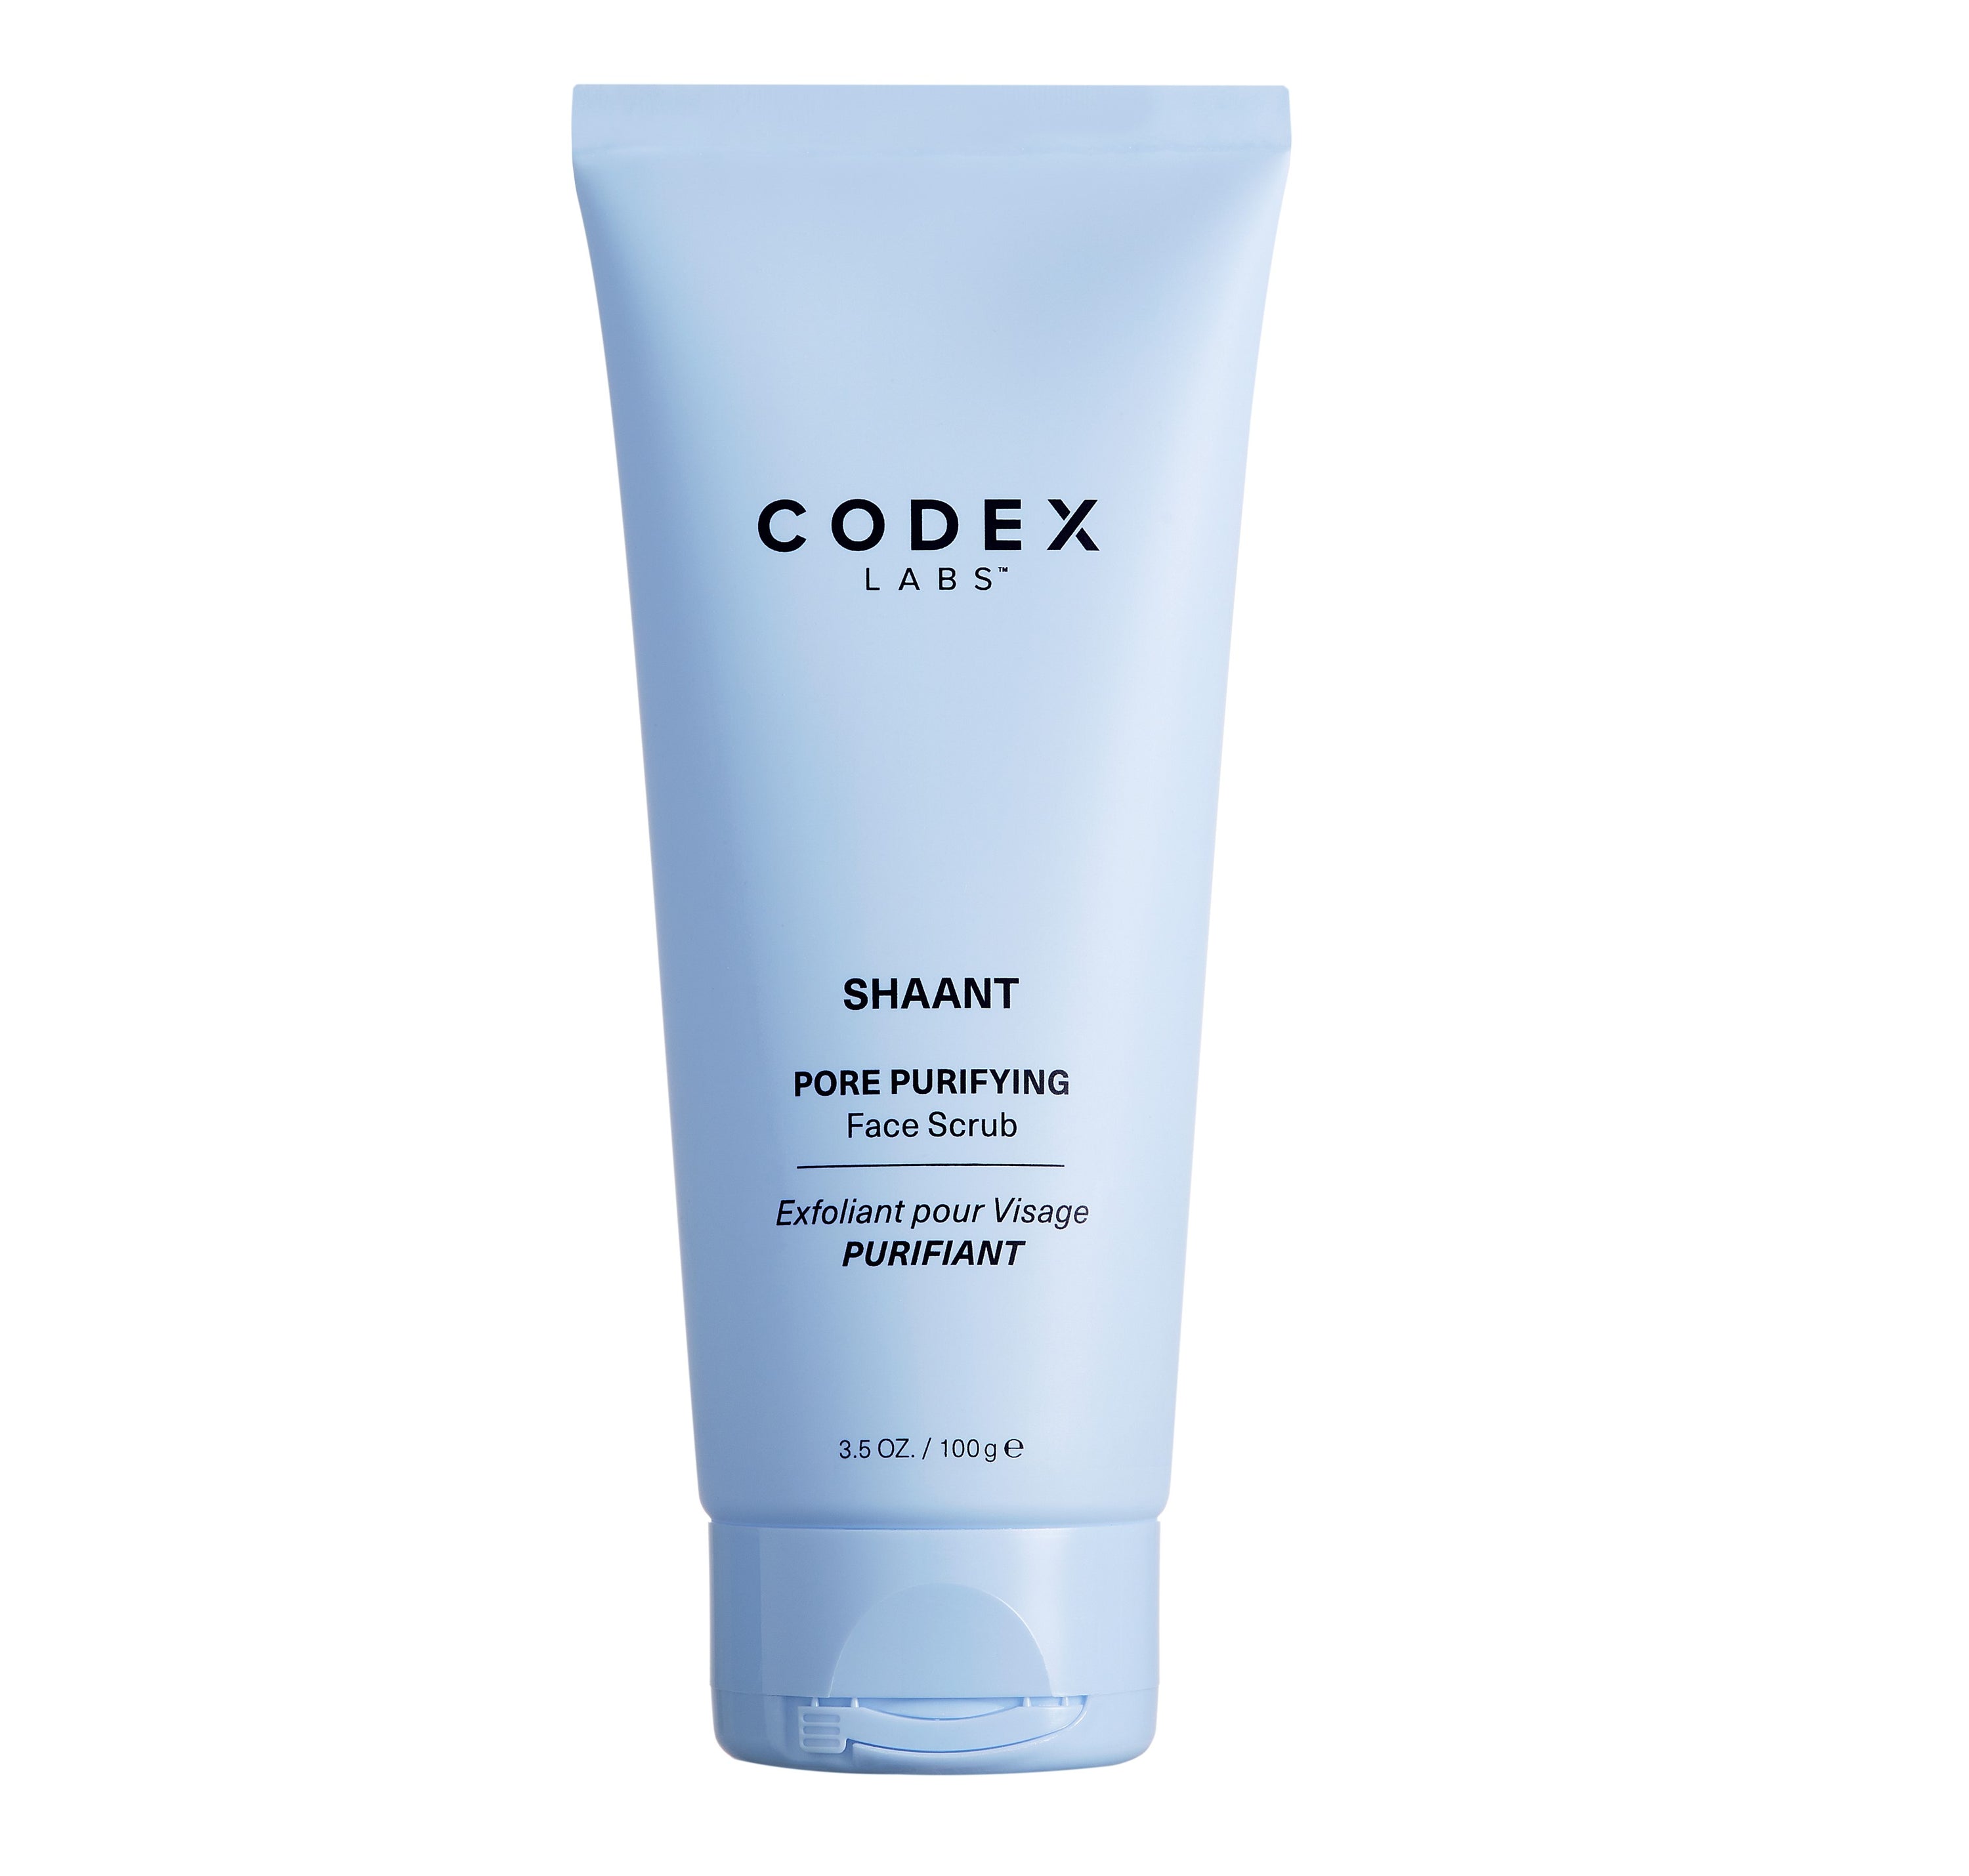 Shaant Pore Purifying Face Scrub